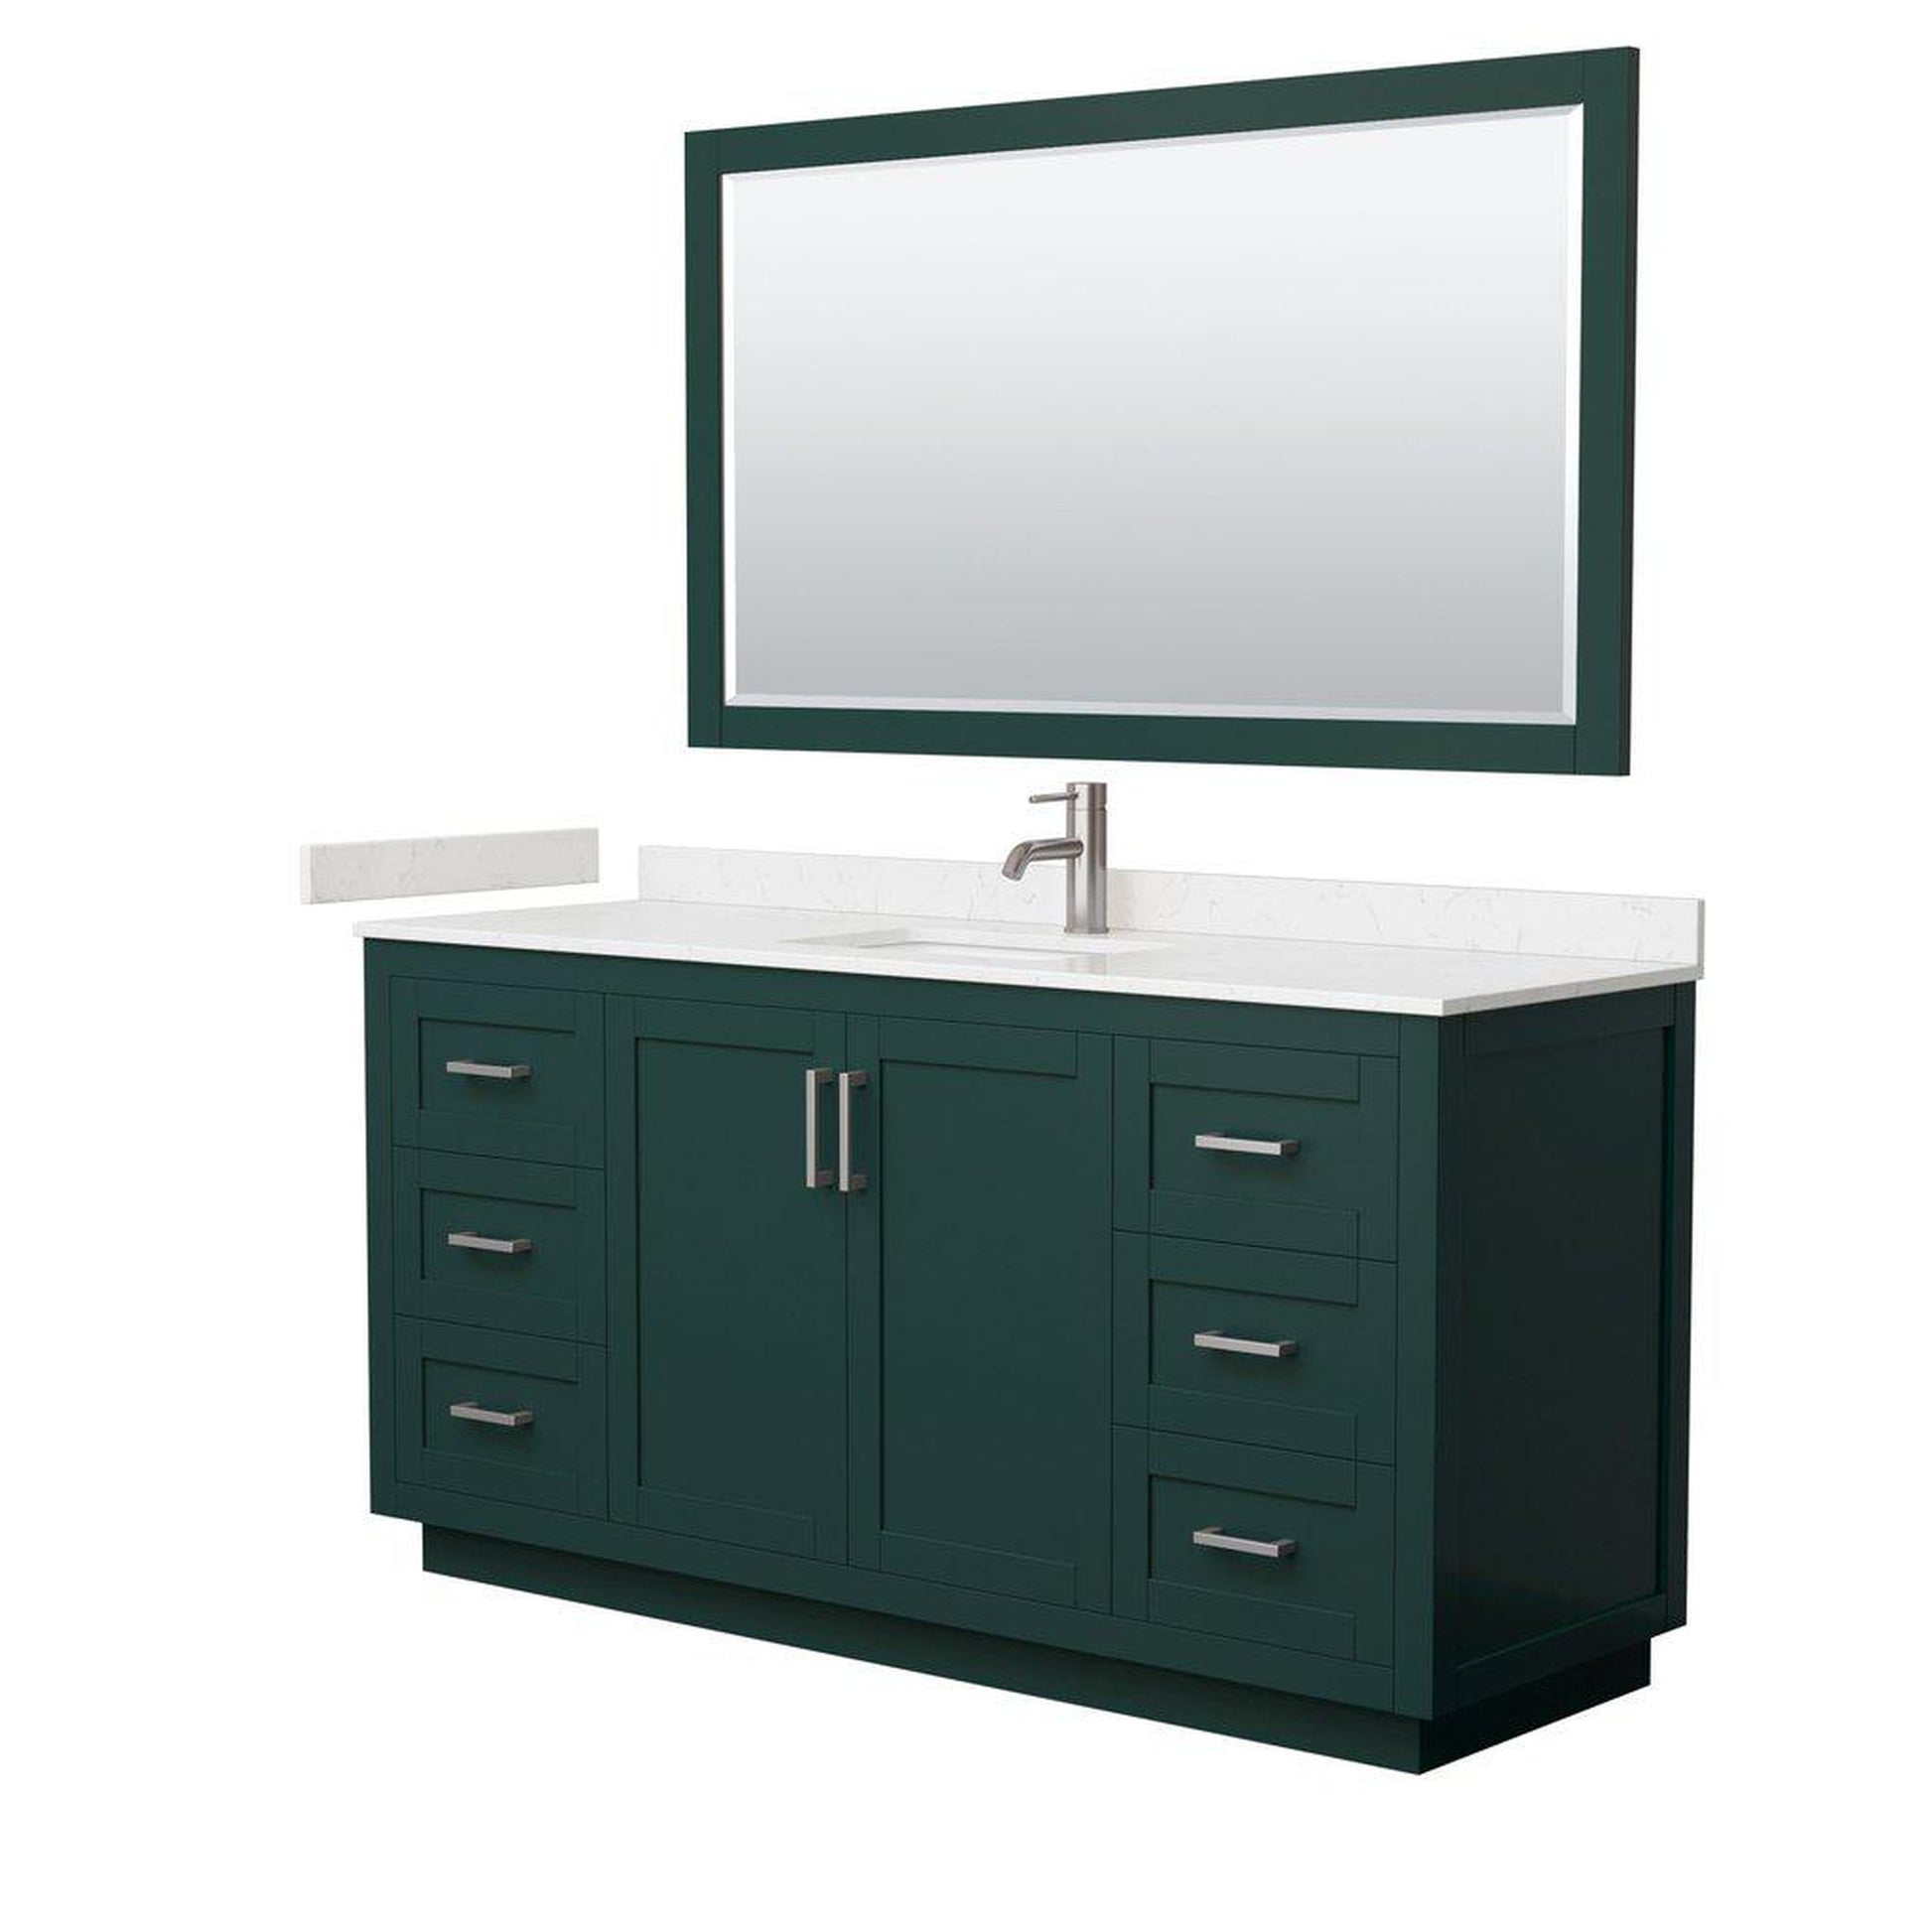 Wyndham Collection Miranda 66" Single Bathroom Green Vanity Set With Light-Vein Carrara Cultured Marble Countertop, Undermount Square Sink, 58" Mirror And Brushed Nickel Trim